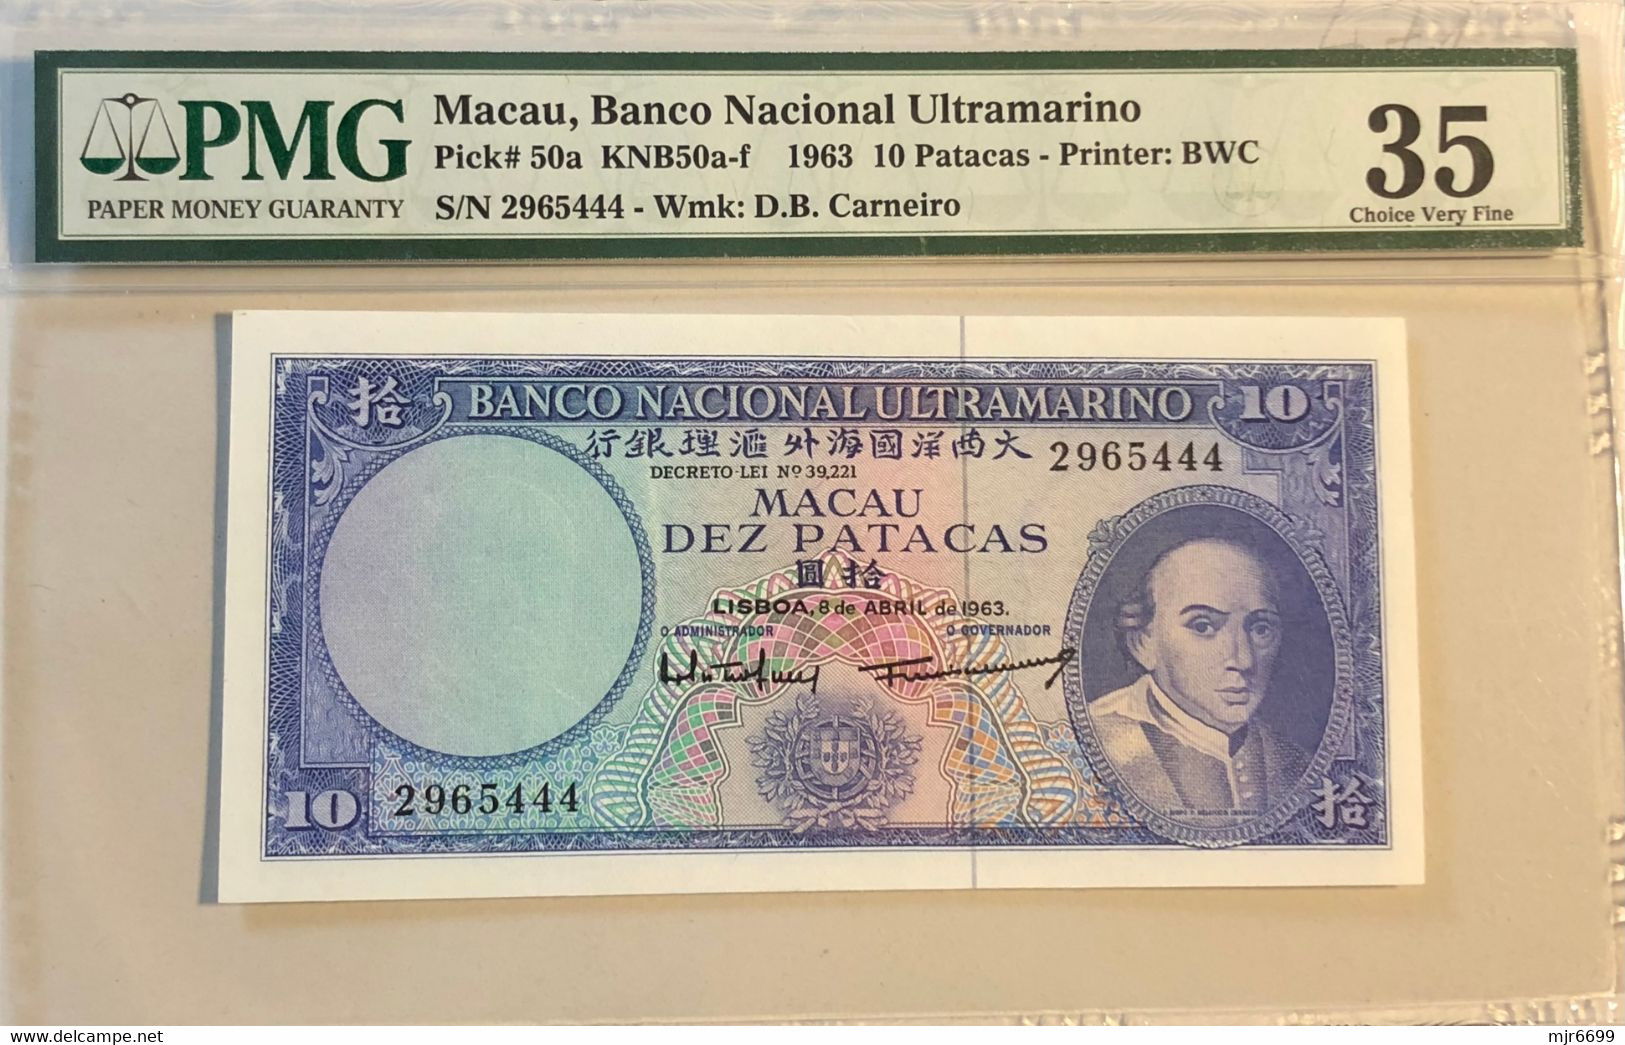 1963 BNU 10 PATACAS KNB50a-f PMG35 - CHOICE VERY FINE - (SHOULD BE WRONG GRADED) - Macao